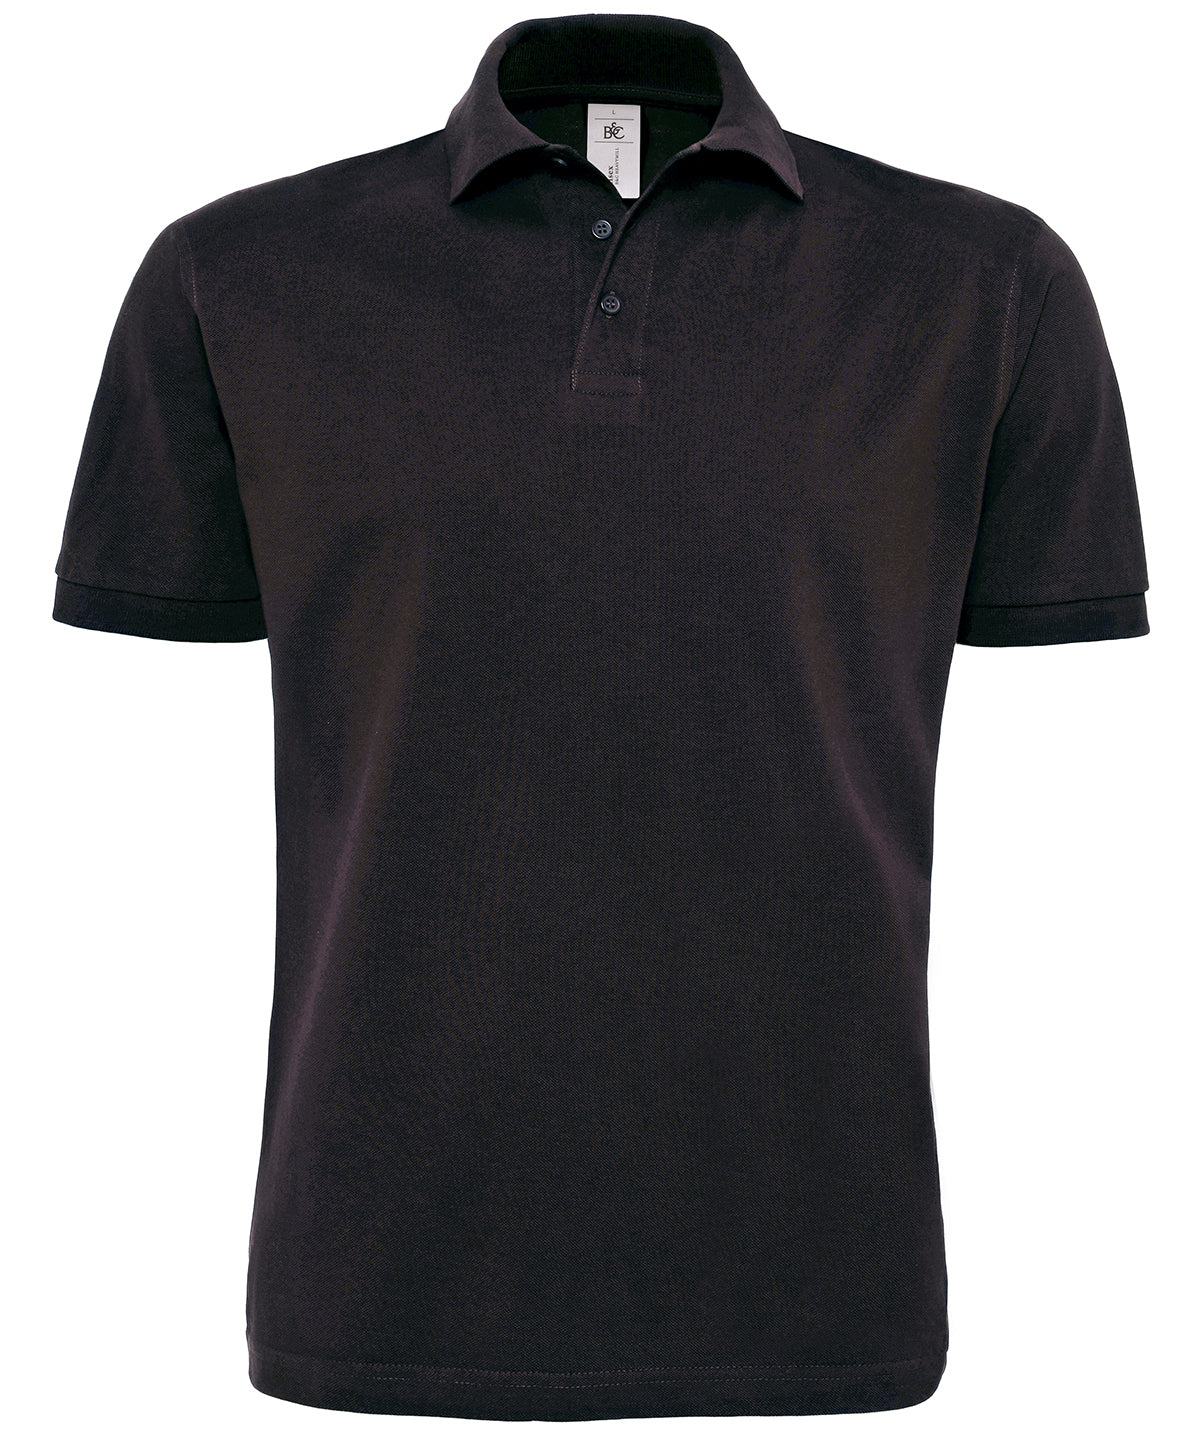 Personalised Polo Shirts - Black B&C Collection B&C Heavymill